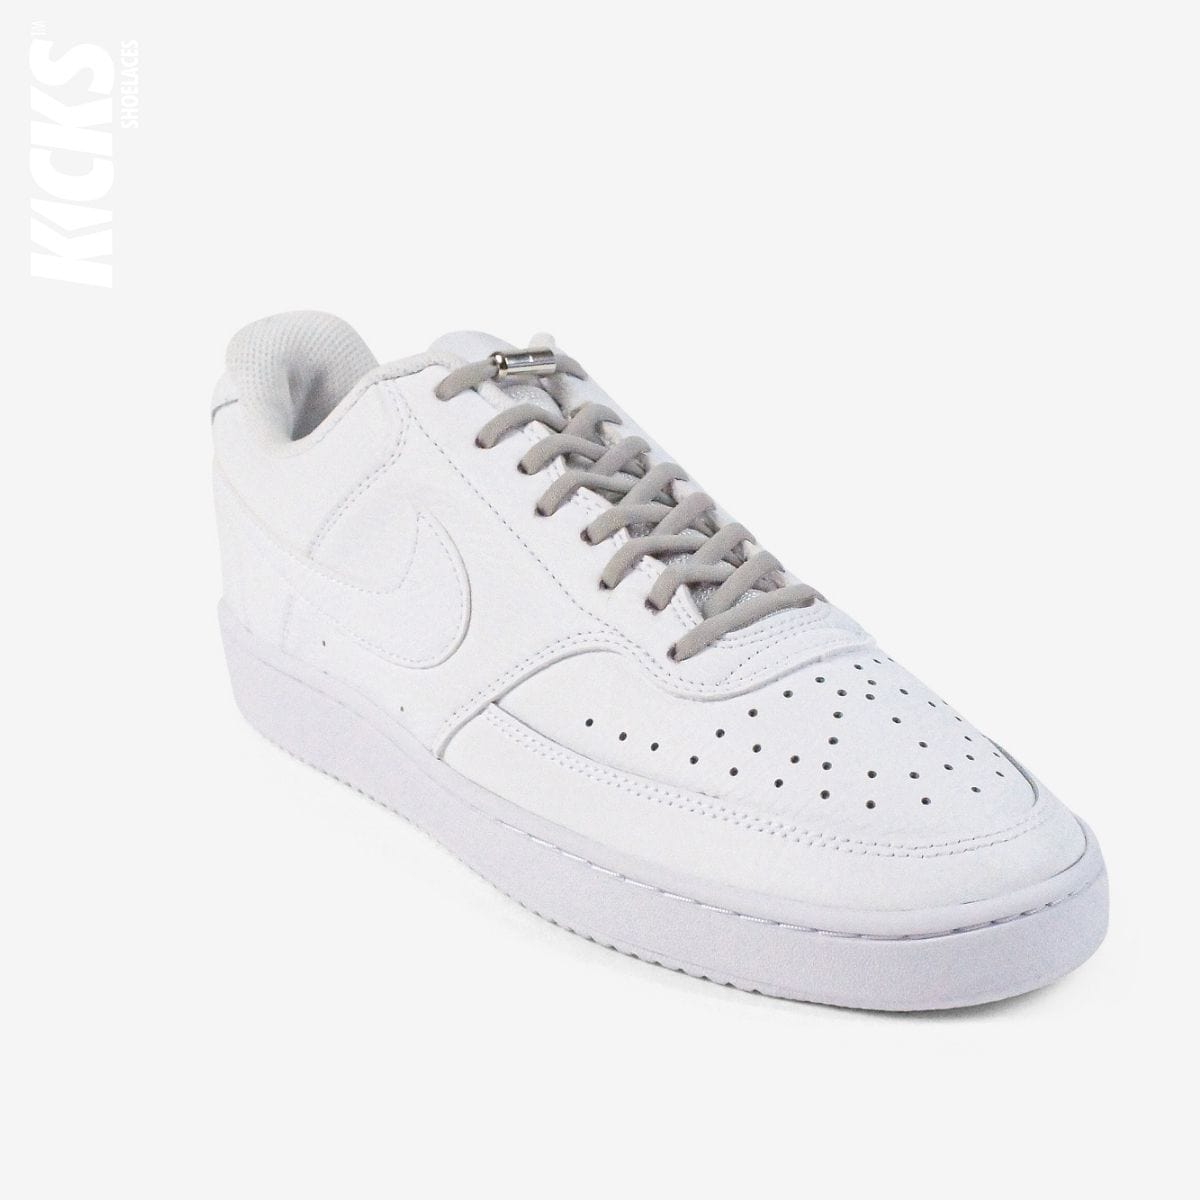 round-no-tie-shoelaces-with-grey-laces-on-nike-white-sneakers-by-kicks-shoelaces